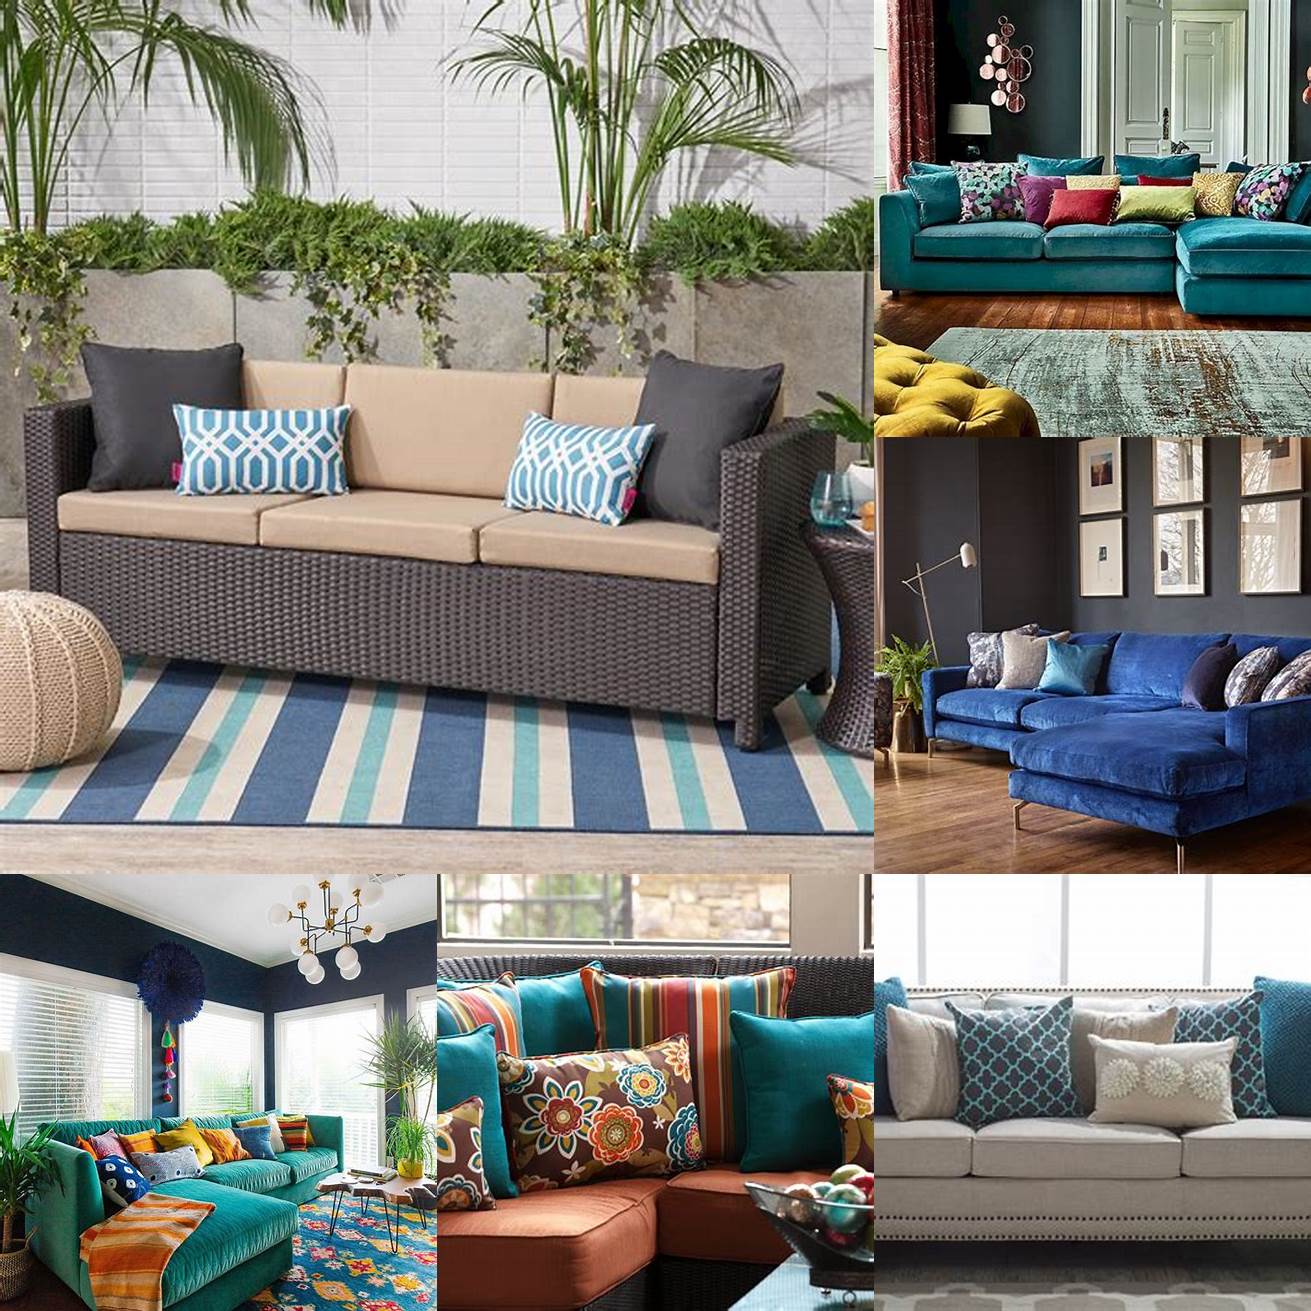 A lounge sofa with colorful cushions